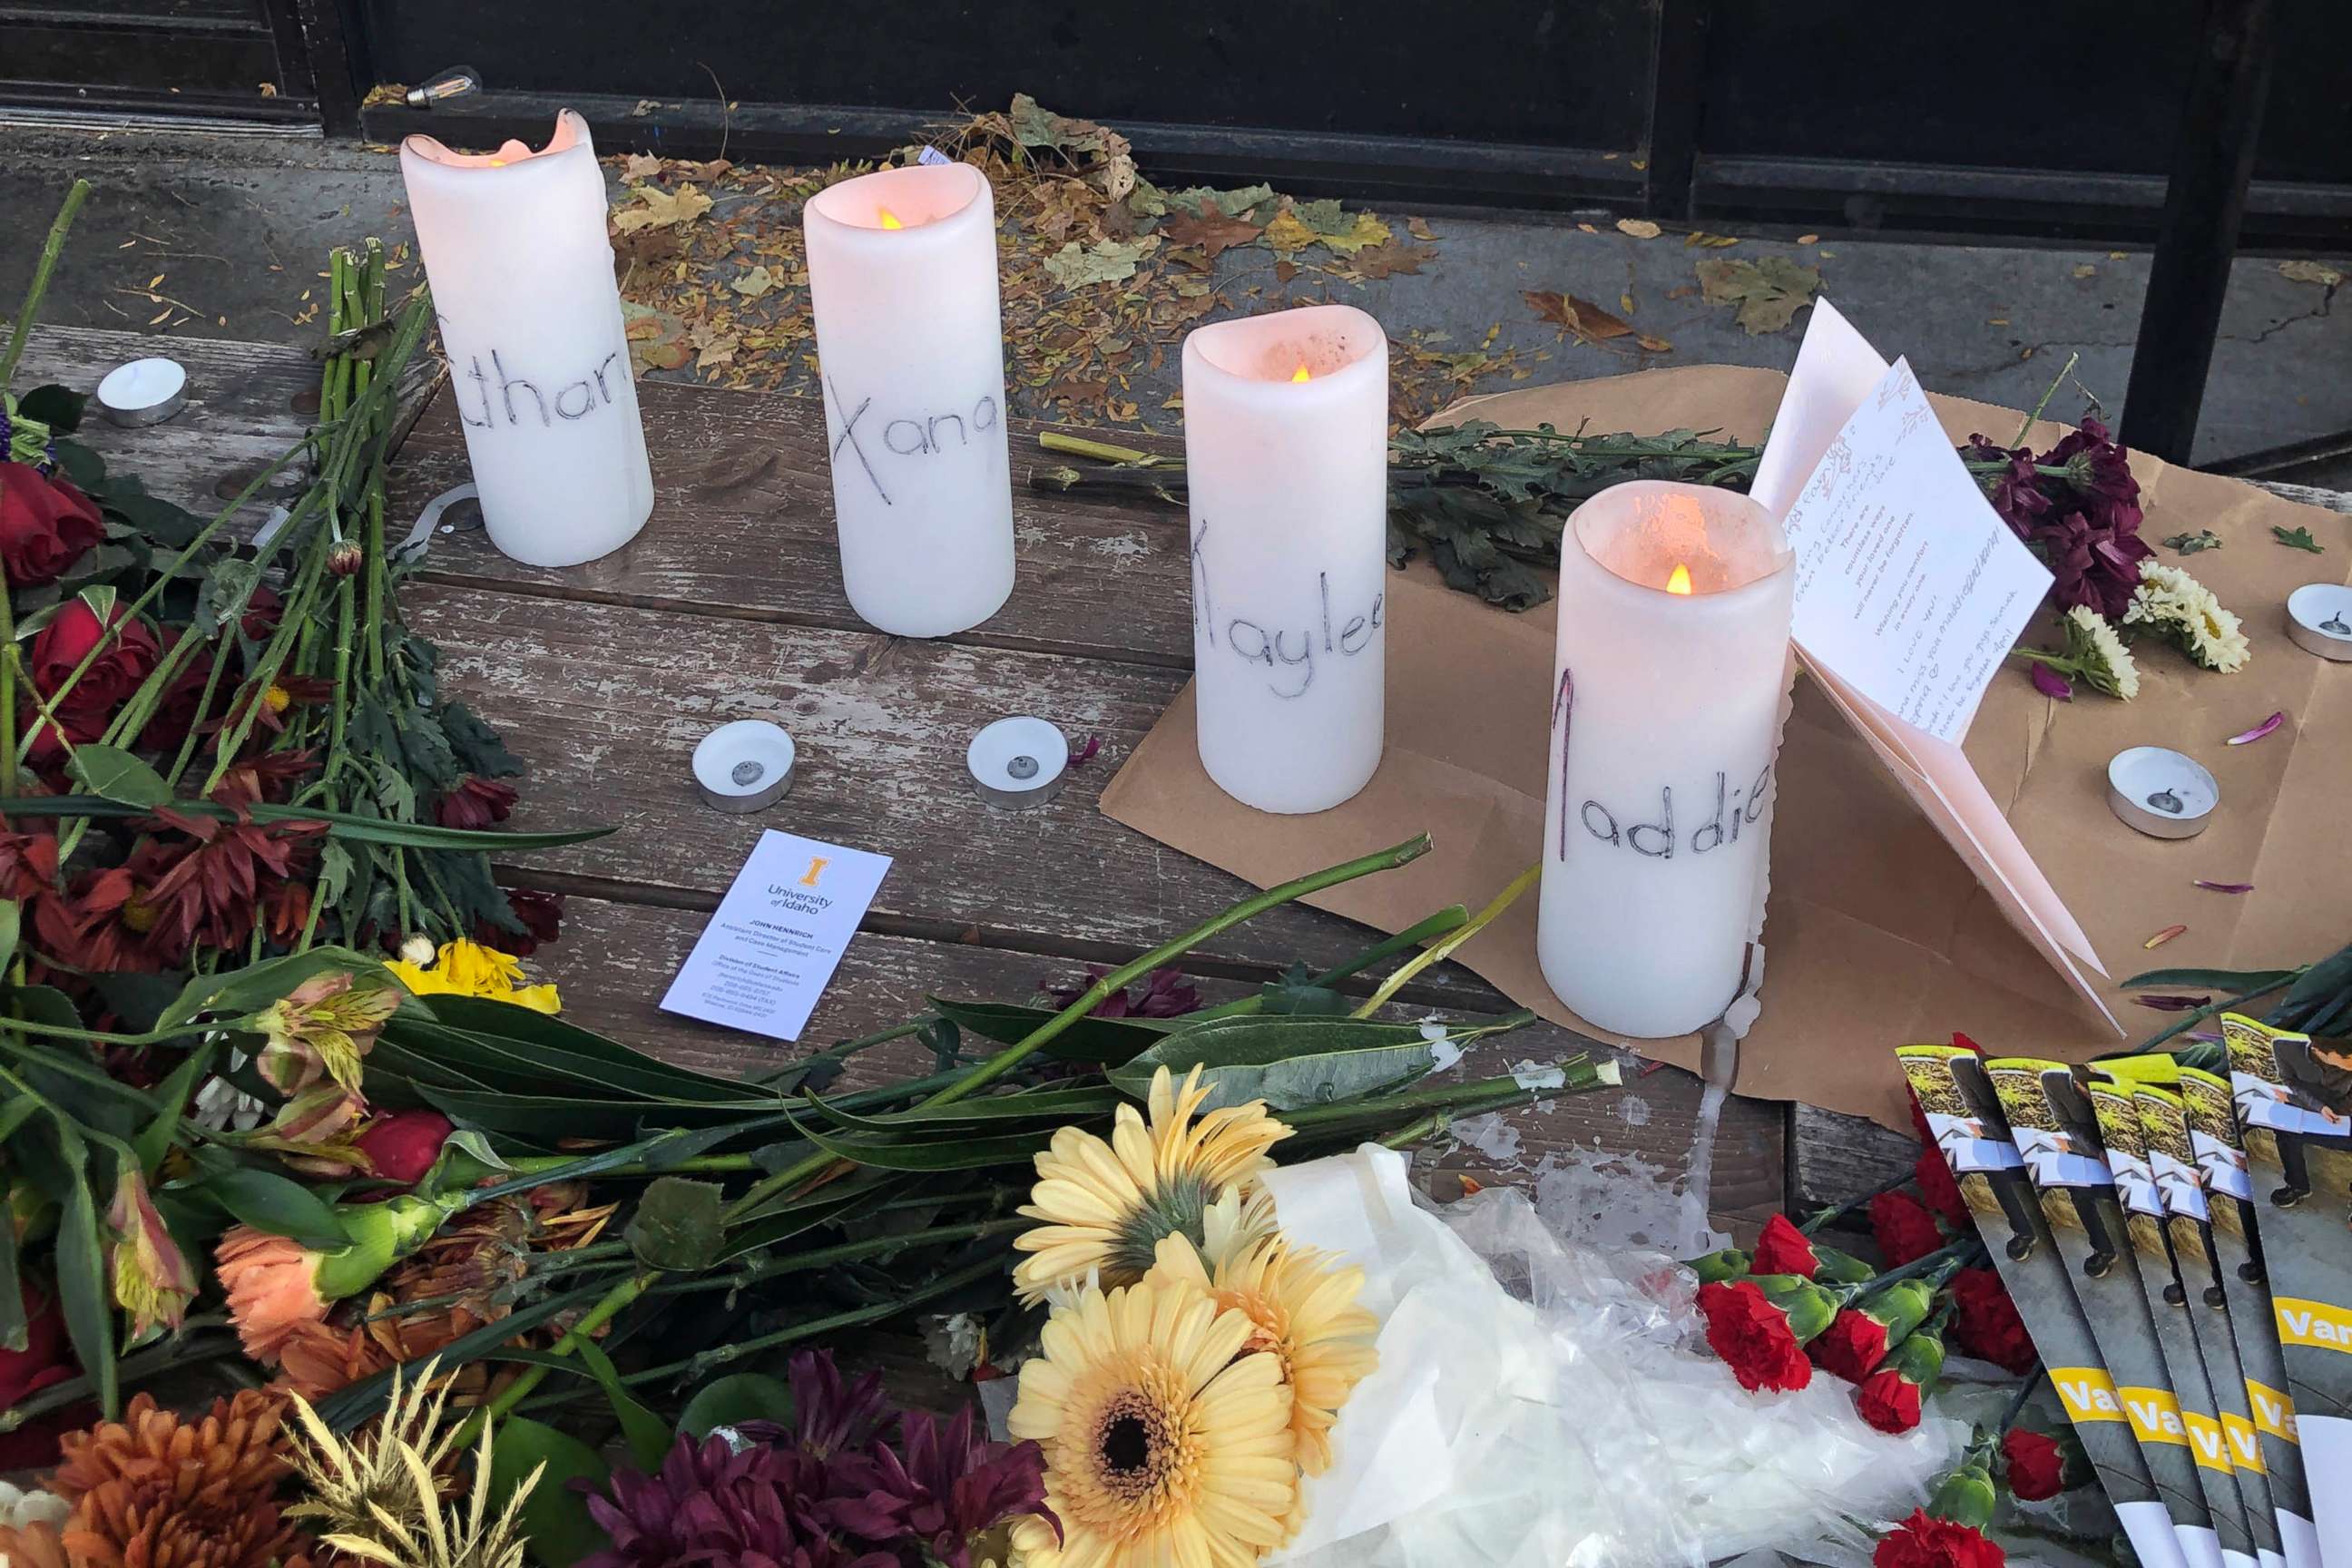 PHOTO: Candles and flowers are left at a make-shift memorial honoring four slain University of Idaho students outside the Mad Greek restaurant in downtown Moscow, Idaho, on Tuesday, Nov. 15, 2022.